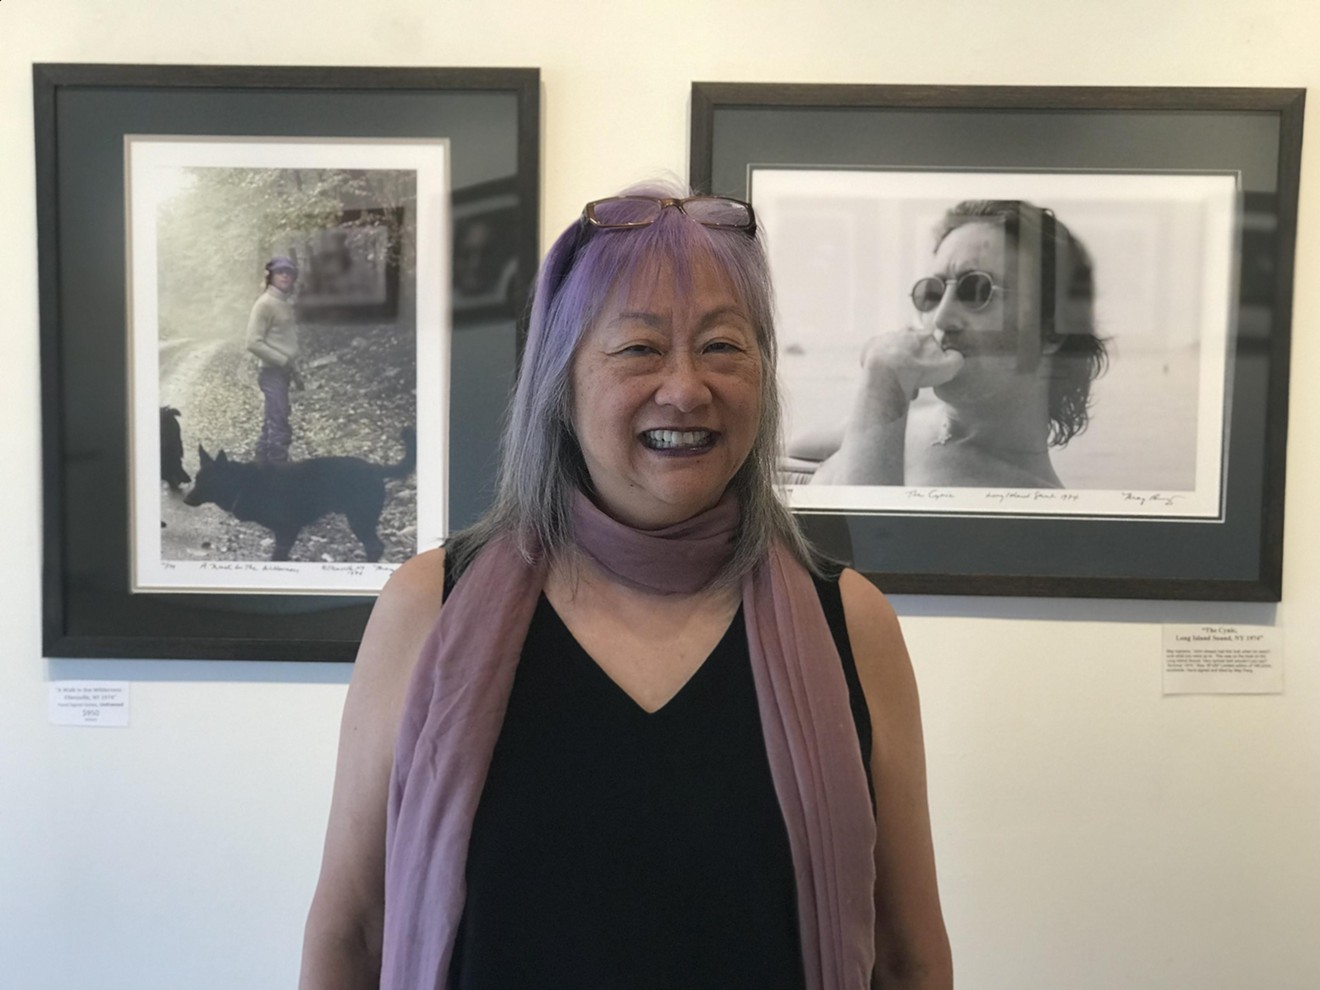 May Pang will be on hand at Keshet Gallery in Boca Raton February 16–18.